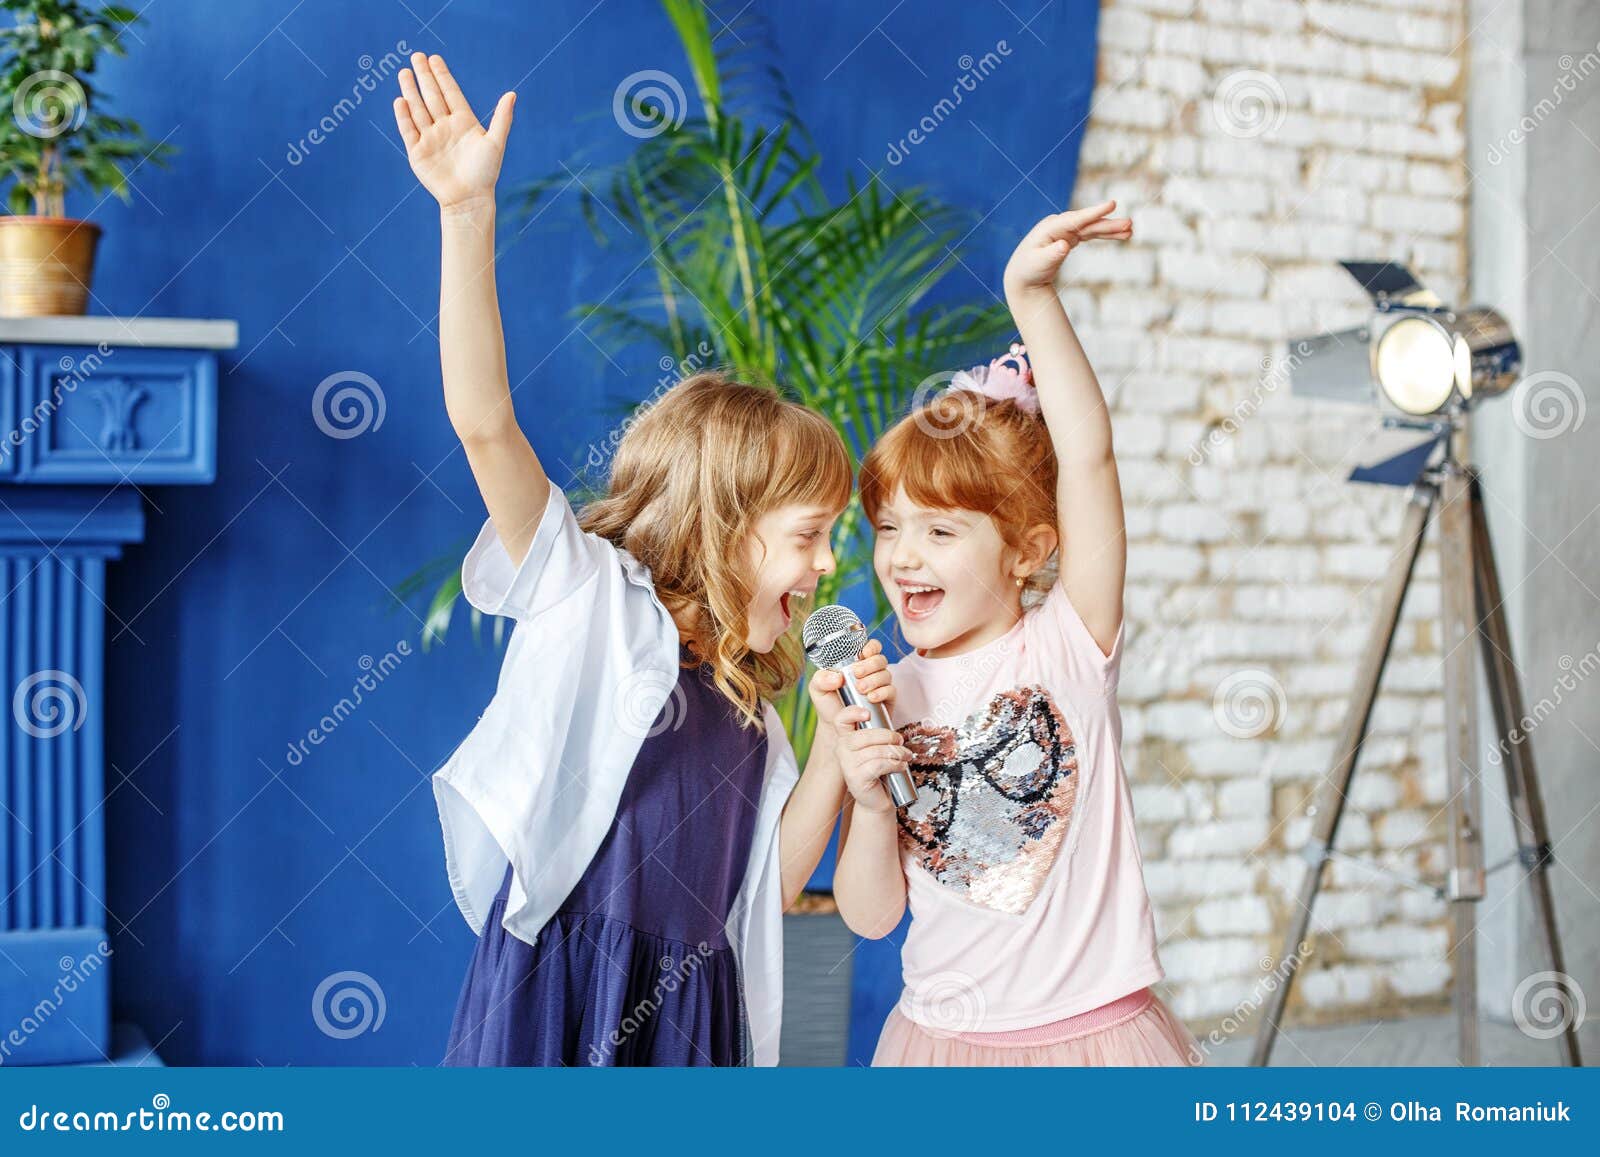 two little funny children dance and sing a song in karaoke. the